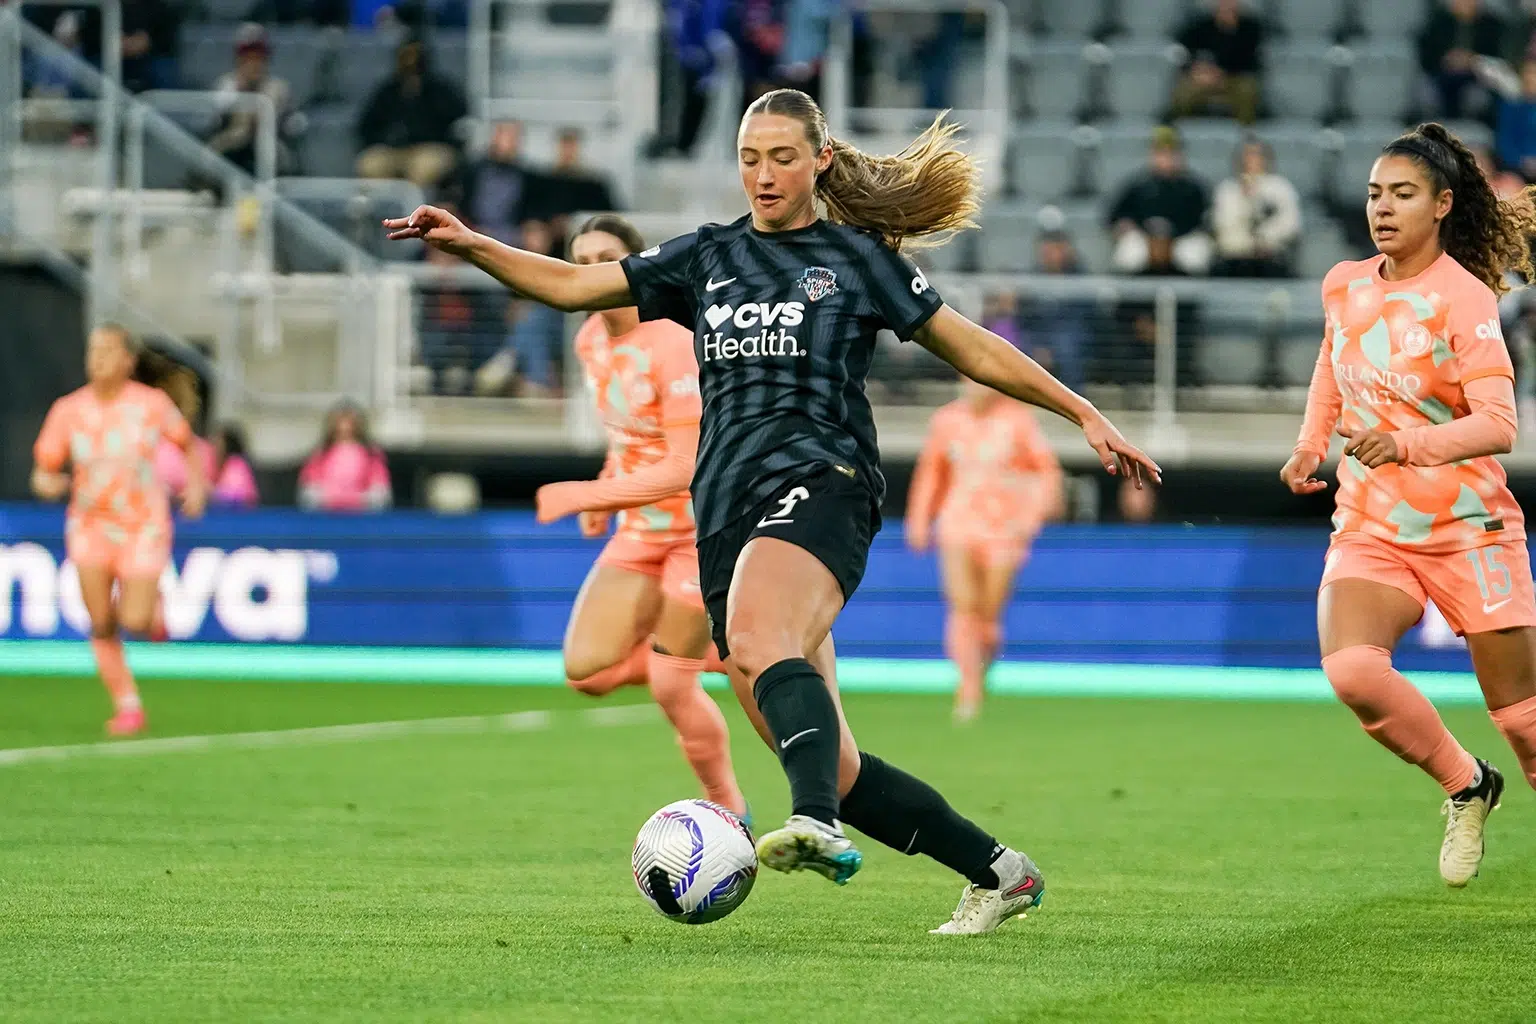 Tara McKeown dribbles a ball while wearing a black kit. Two Orlando defenders in orange kits chase behind.